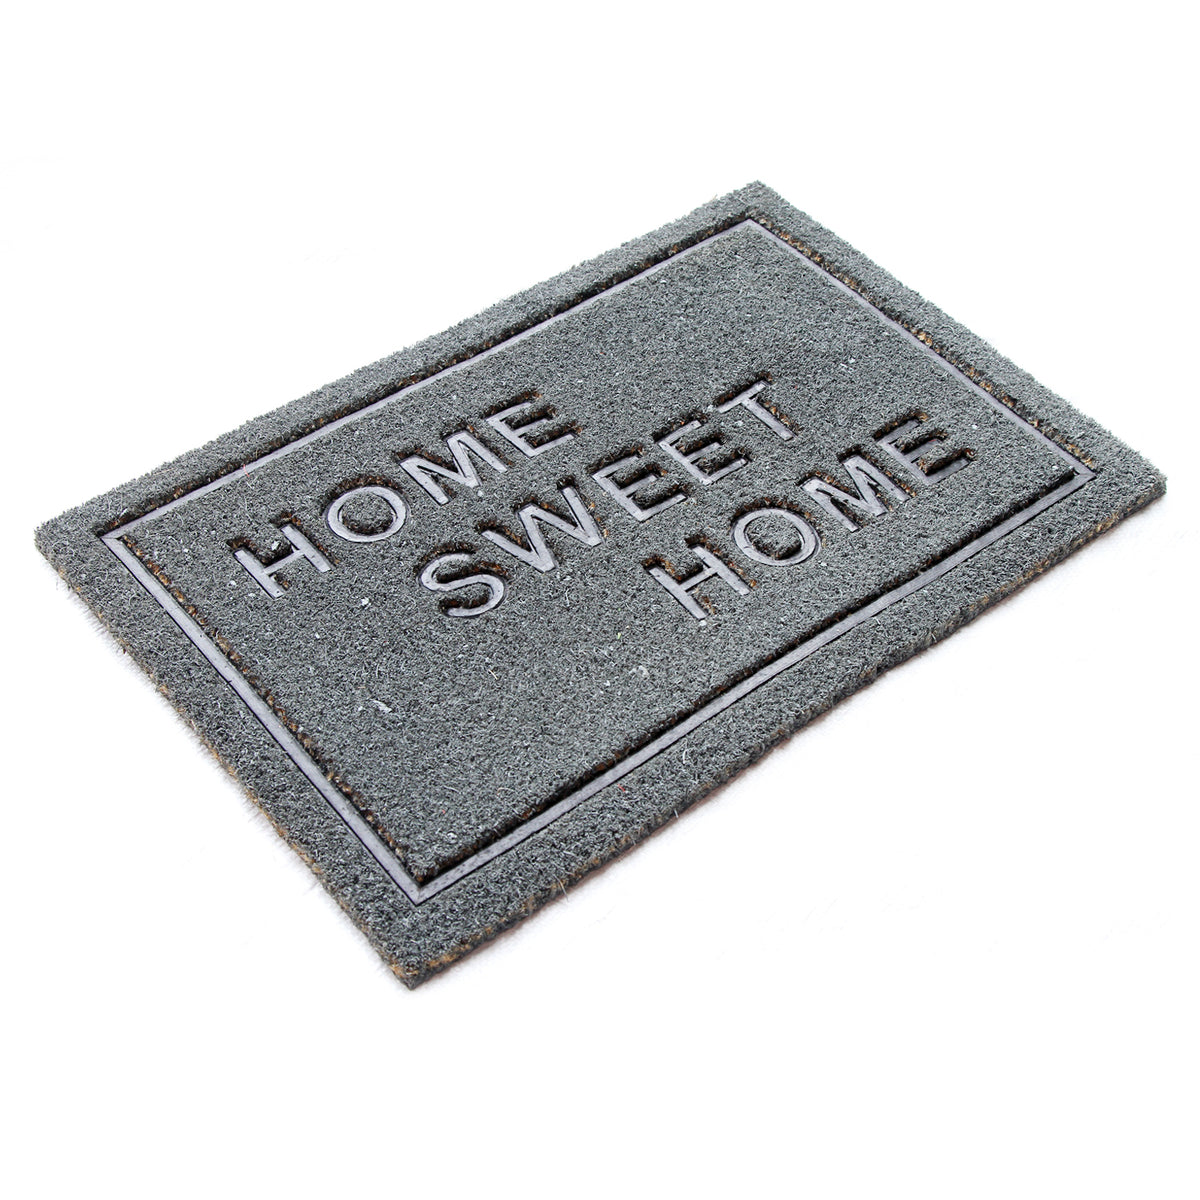 Pressed HomeSweetHome Design Natural Coir Doormat. PVCIMP 00010 GRY - OnlyMat